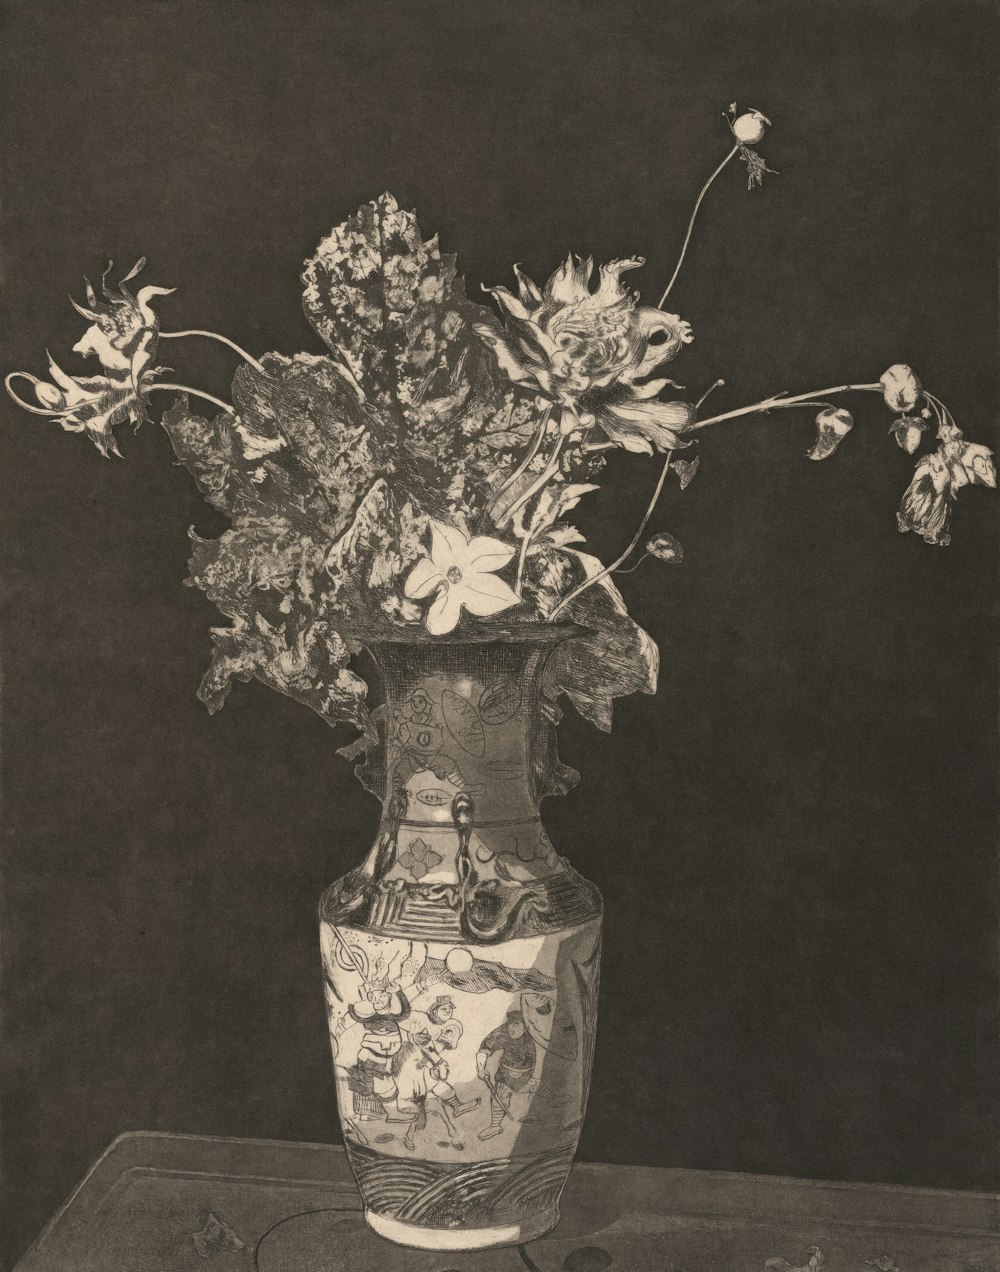 a black and white photo of flowers in a vase